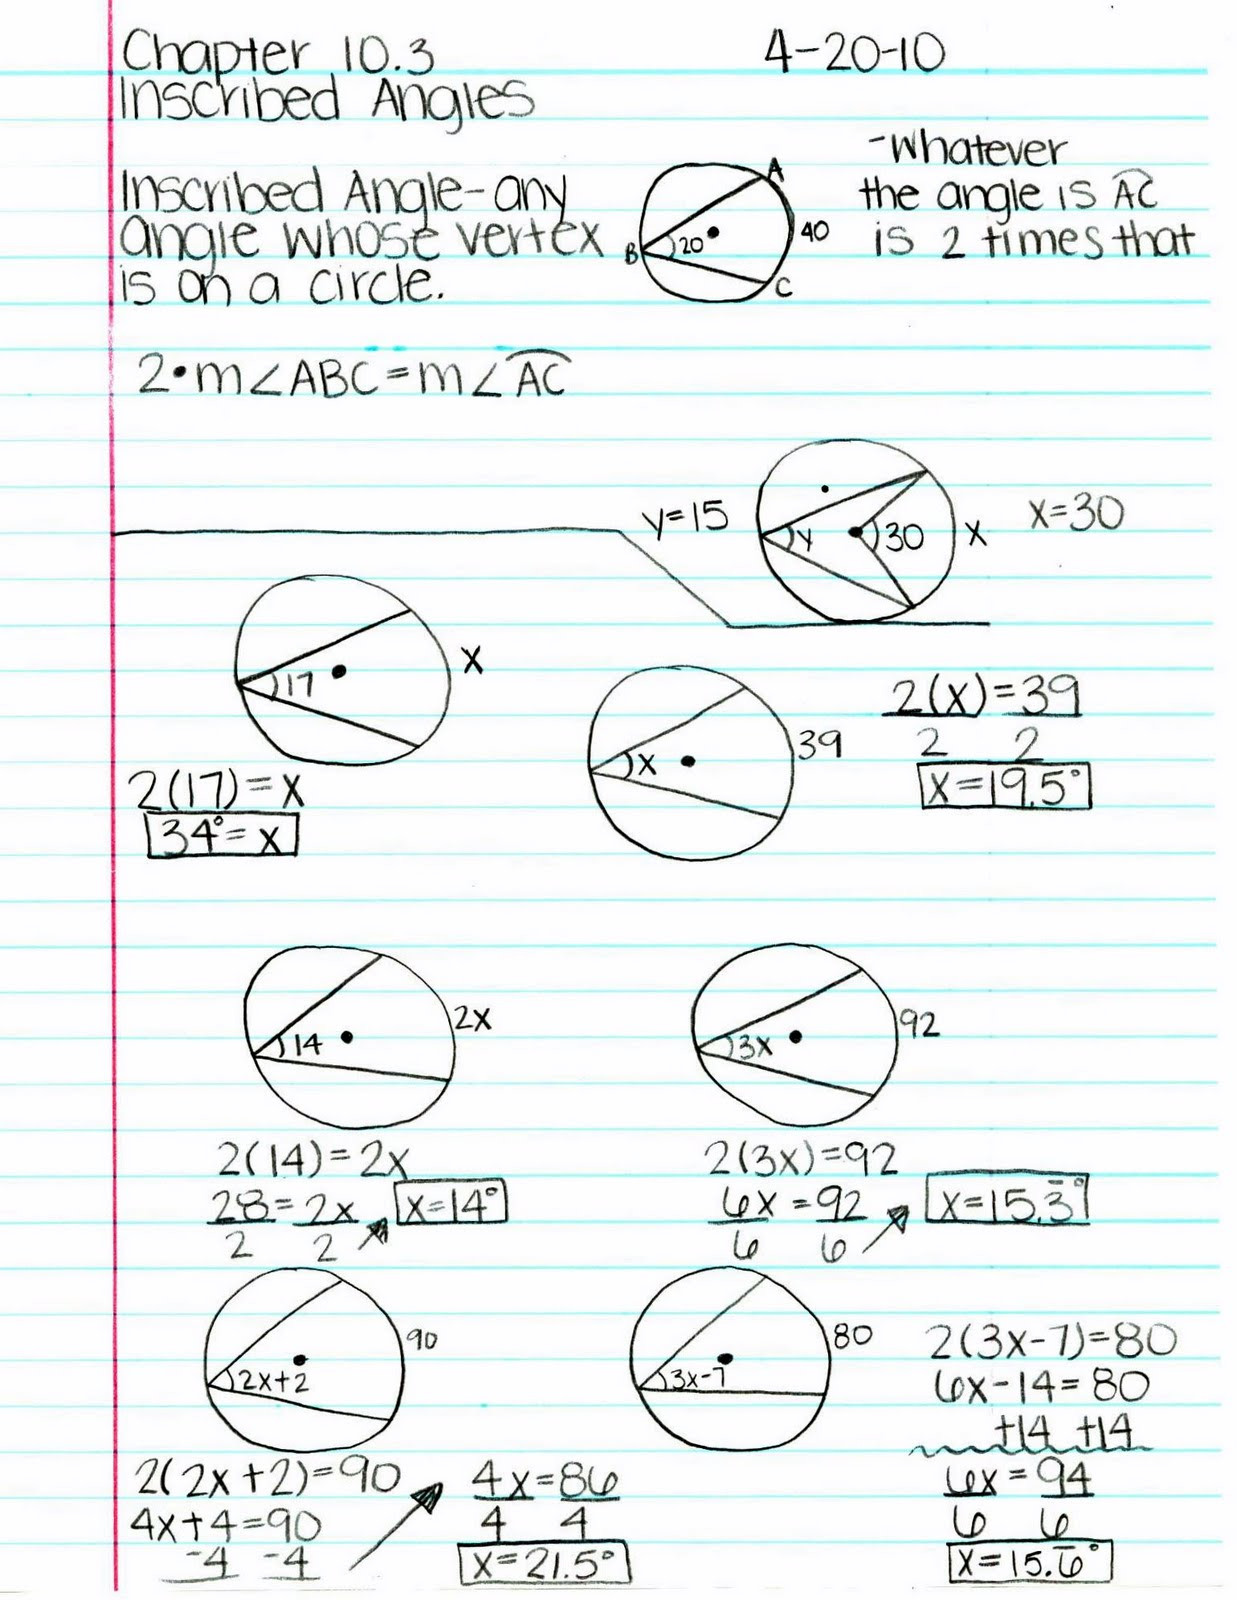 Central and Inscribed Angle Worksheet 32 Arcs Central Angles and Inscribed Angles Worksheet